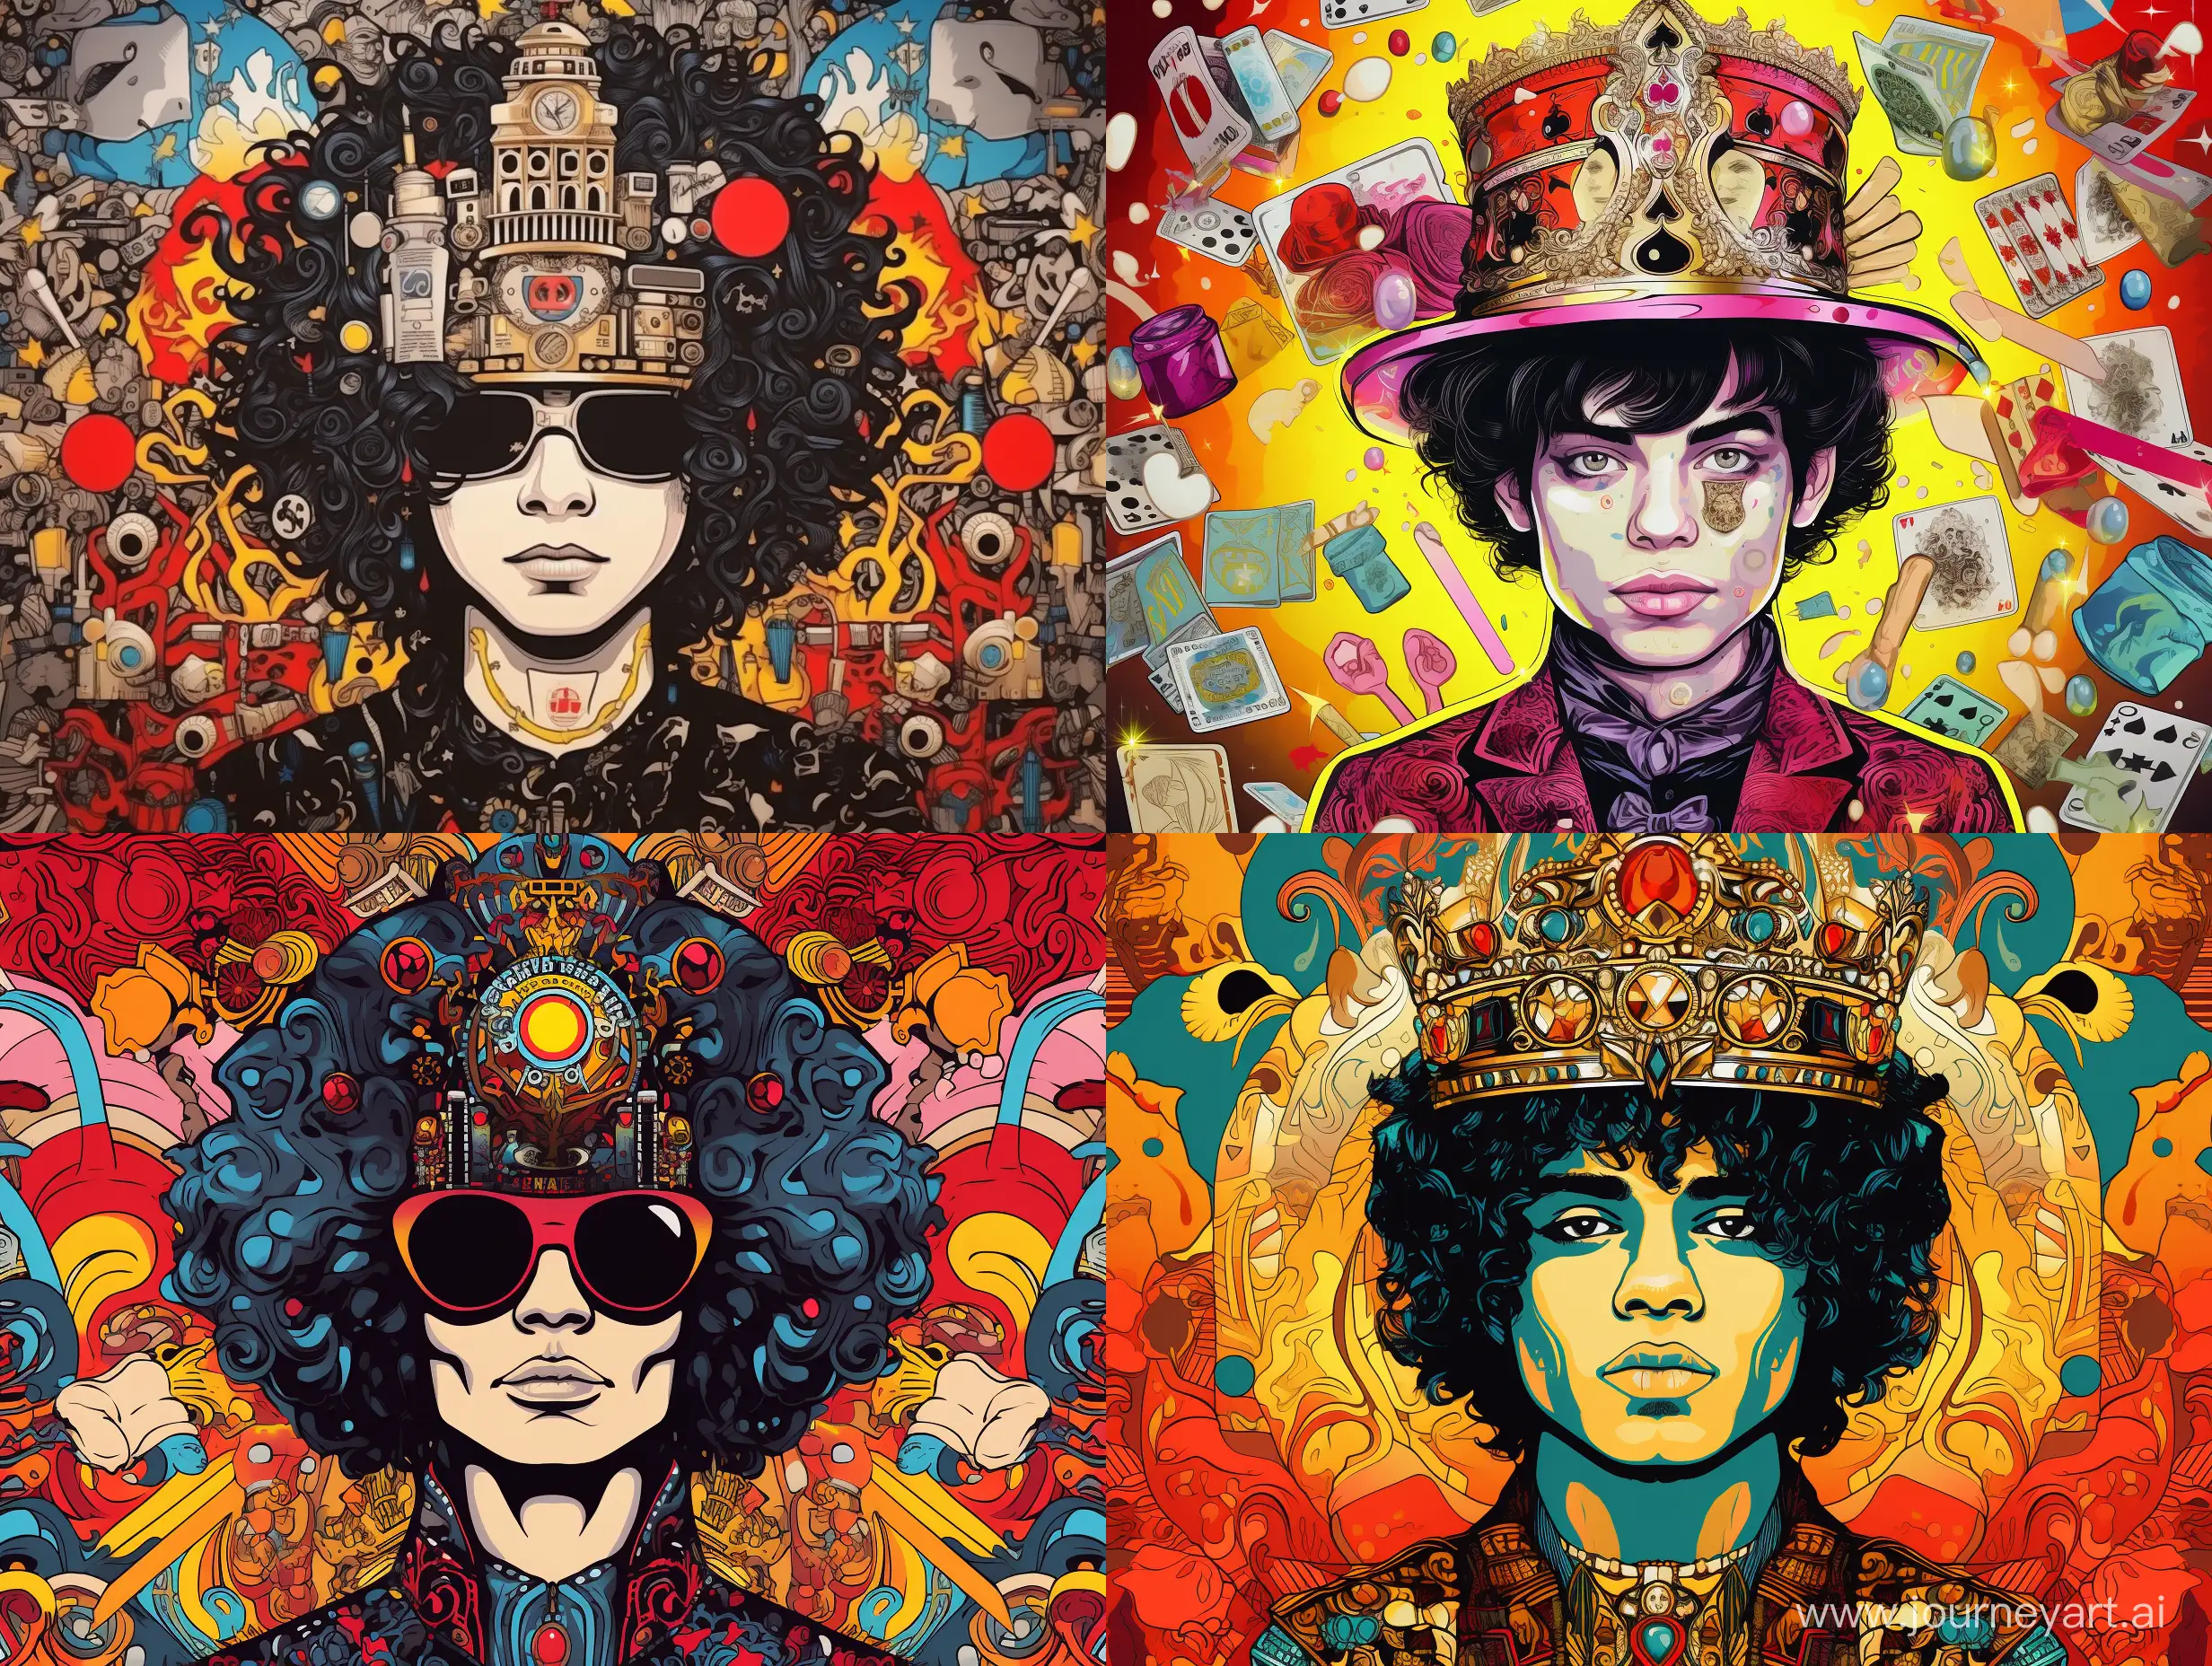 Young-Michael-Jackson-with-Crown-in-Musical-Pop-Art-Portrait